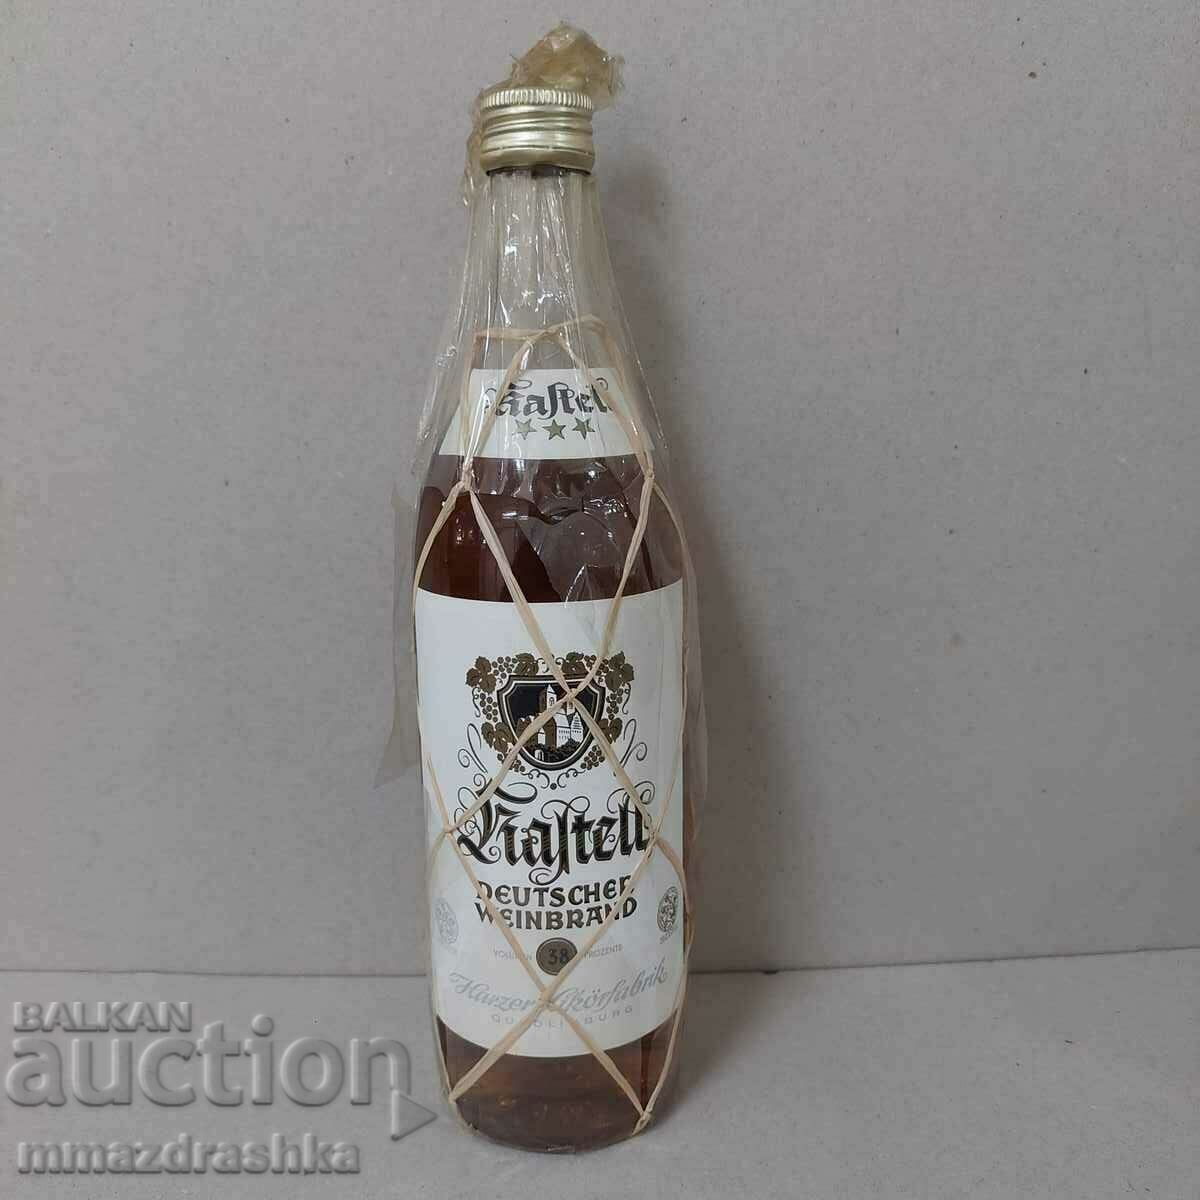 German brandy aged 50+ years, for collection